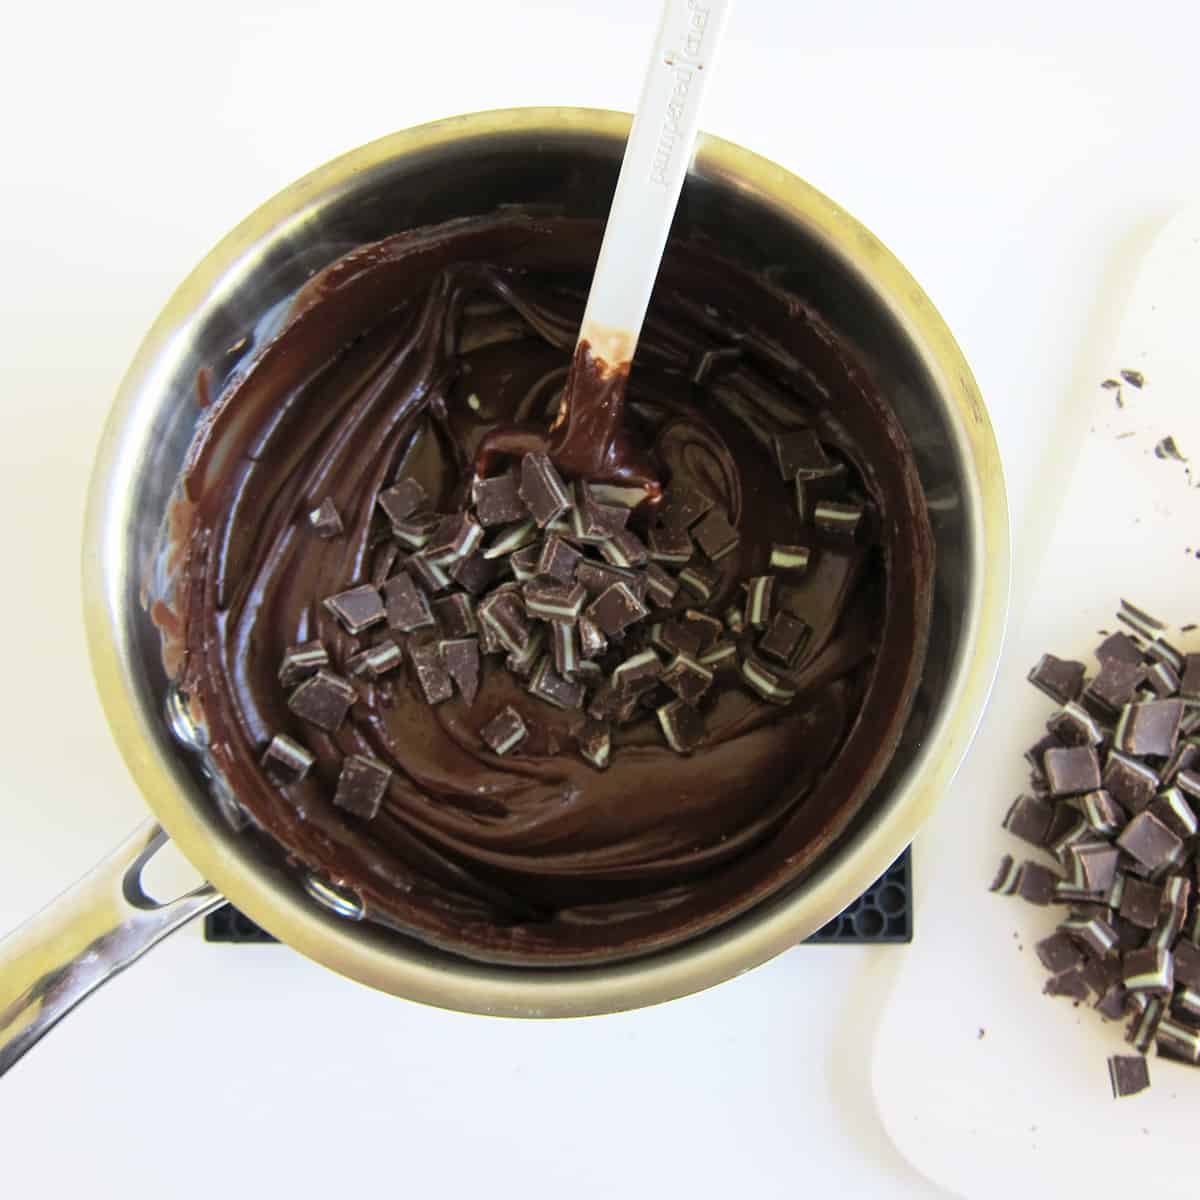 melted chocolate fudge with chopped Andes Mints on top.